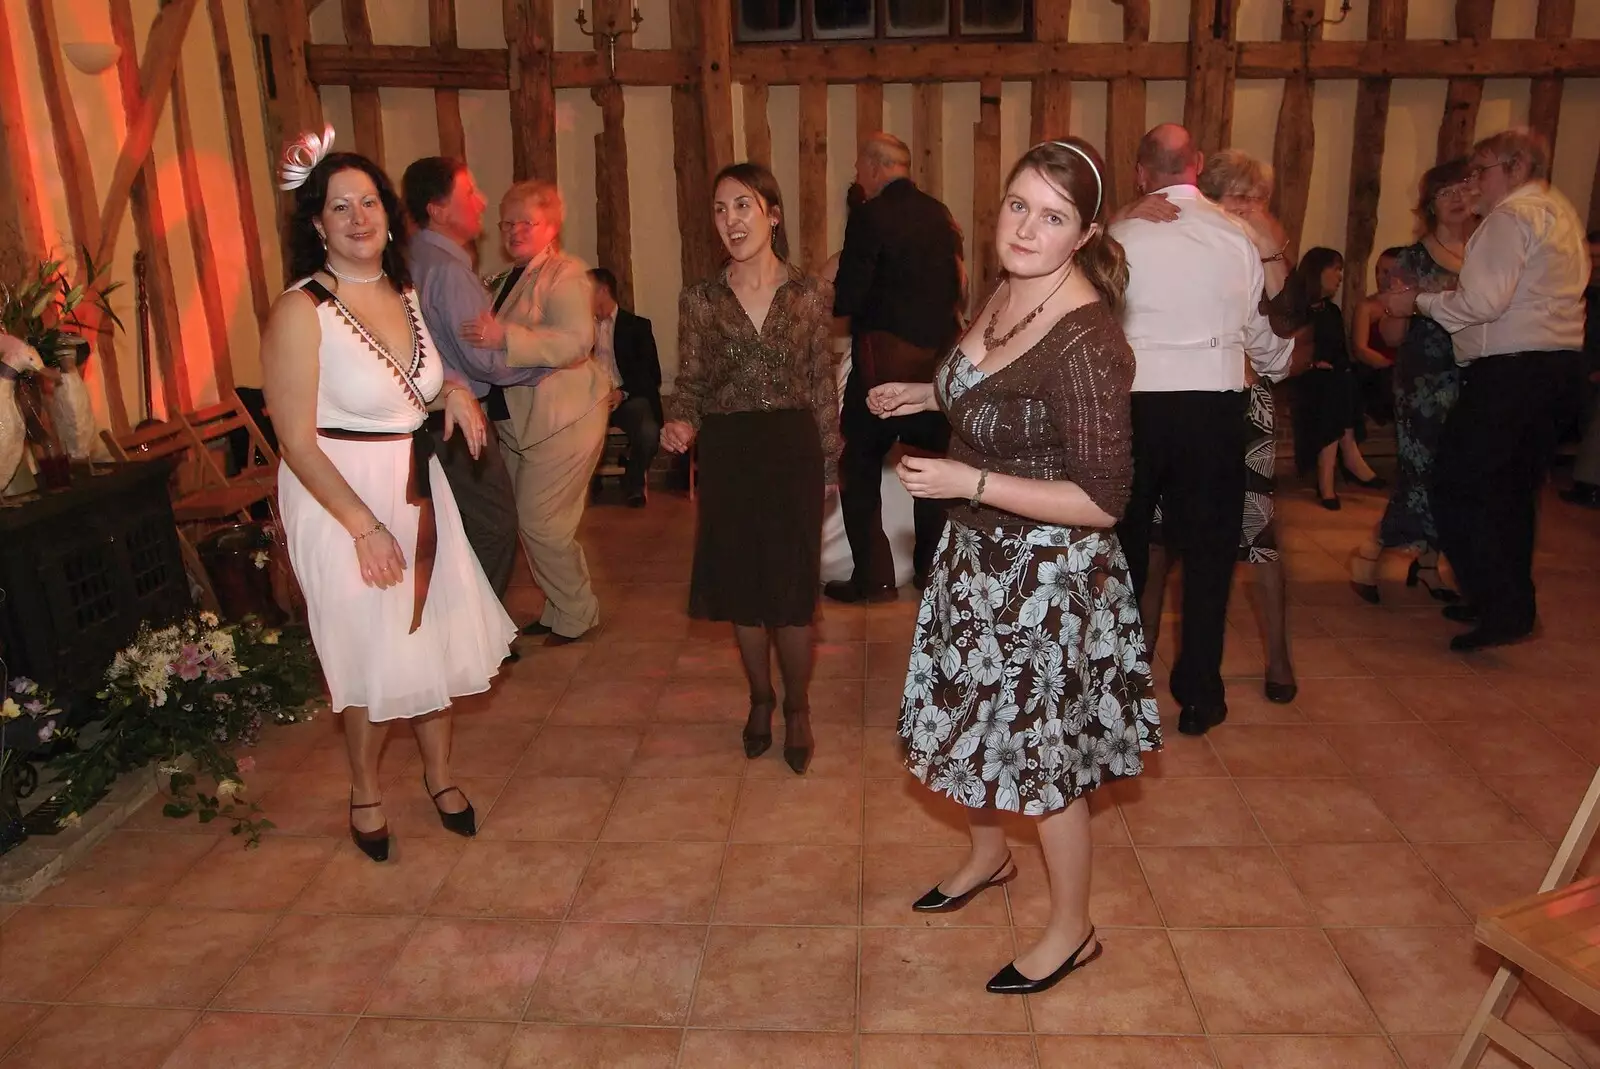 Clare, Carmen and Isobel show some moves, from Gov and Rachel's Wedding, Thorndon, Suffolk - 2nd February 2008